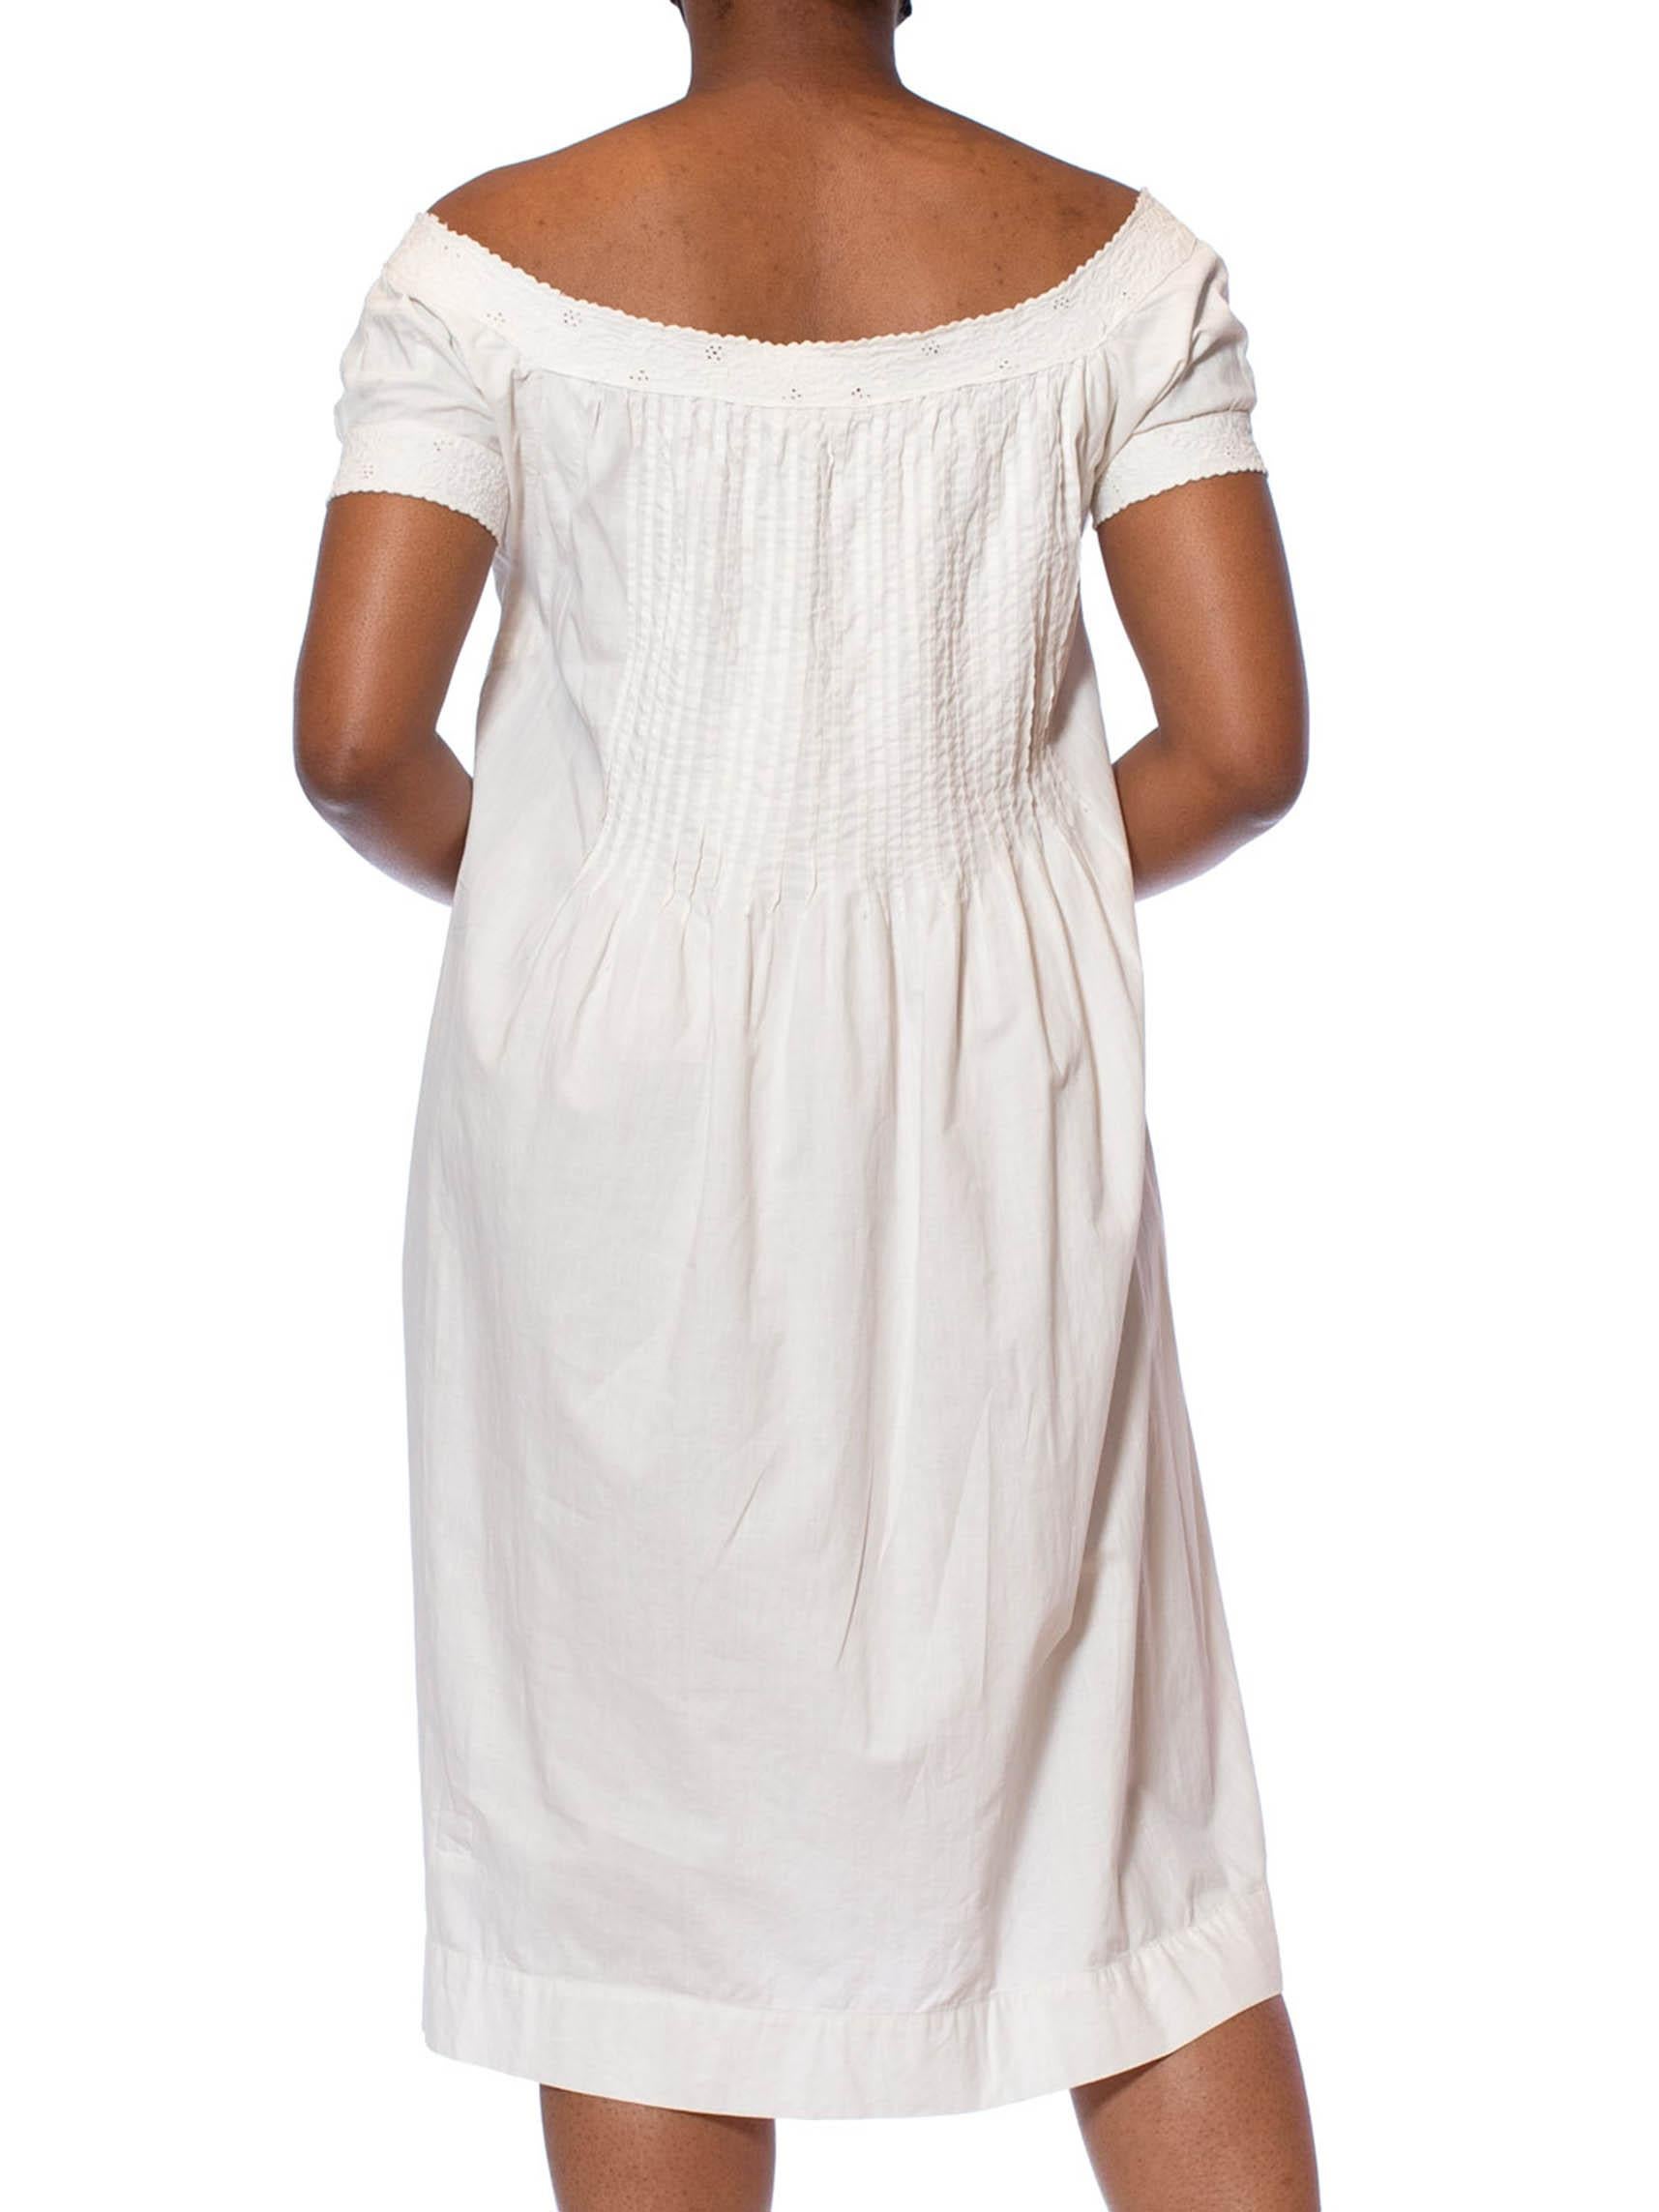 Victorian White Hand Embroidered Organic Cotton 1860S Chemise Dress 3